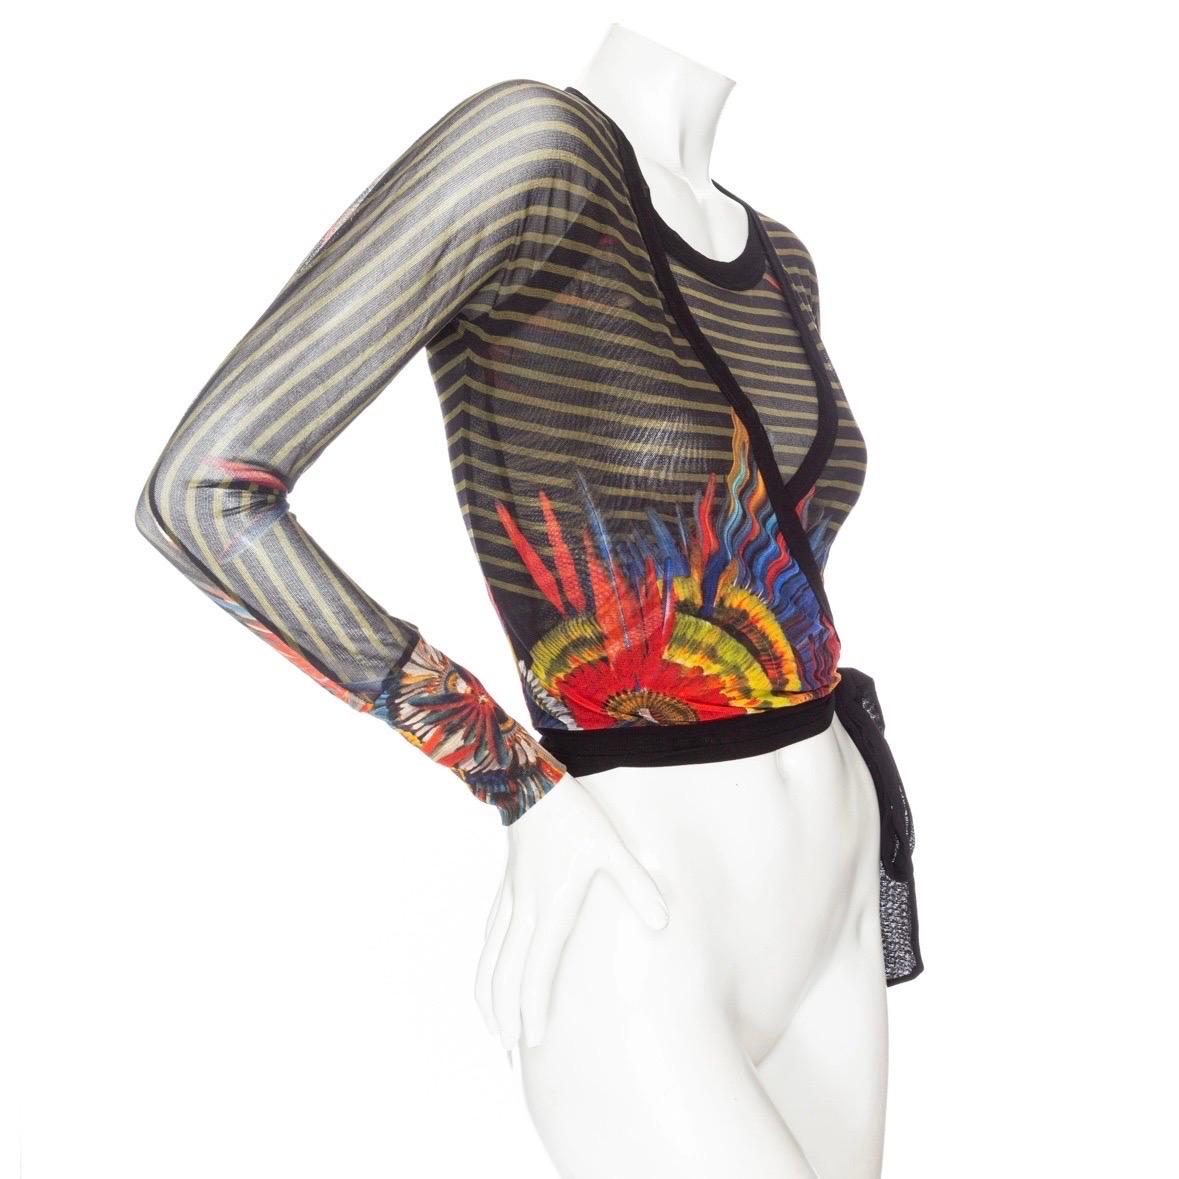 Jean Paul Gaultier Vintage Soleil Black Striped Abstract Floral Print Long Sleeve Wrap Top and Tank Top Set 

Vintage; circa 2000s
Matching set includes wrap top and tank
Multicolored: black, brown, orange, red, blue, purple
Striped and abstract